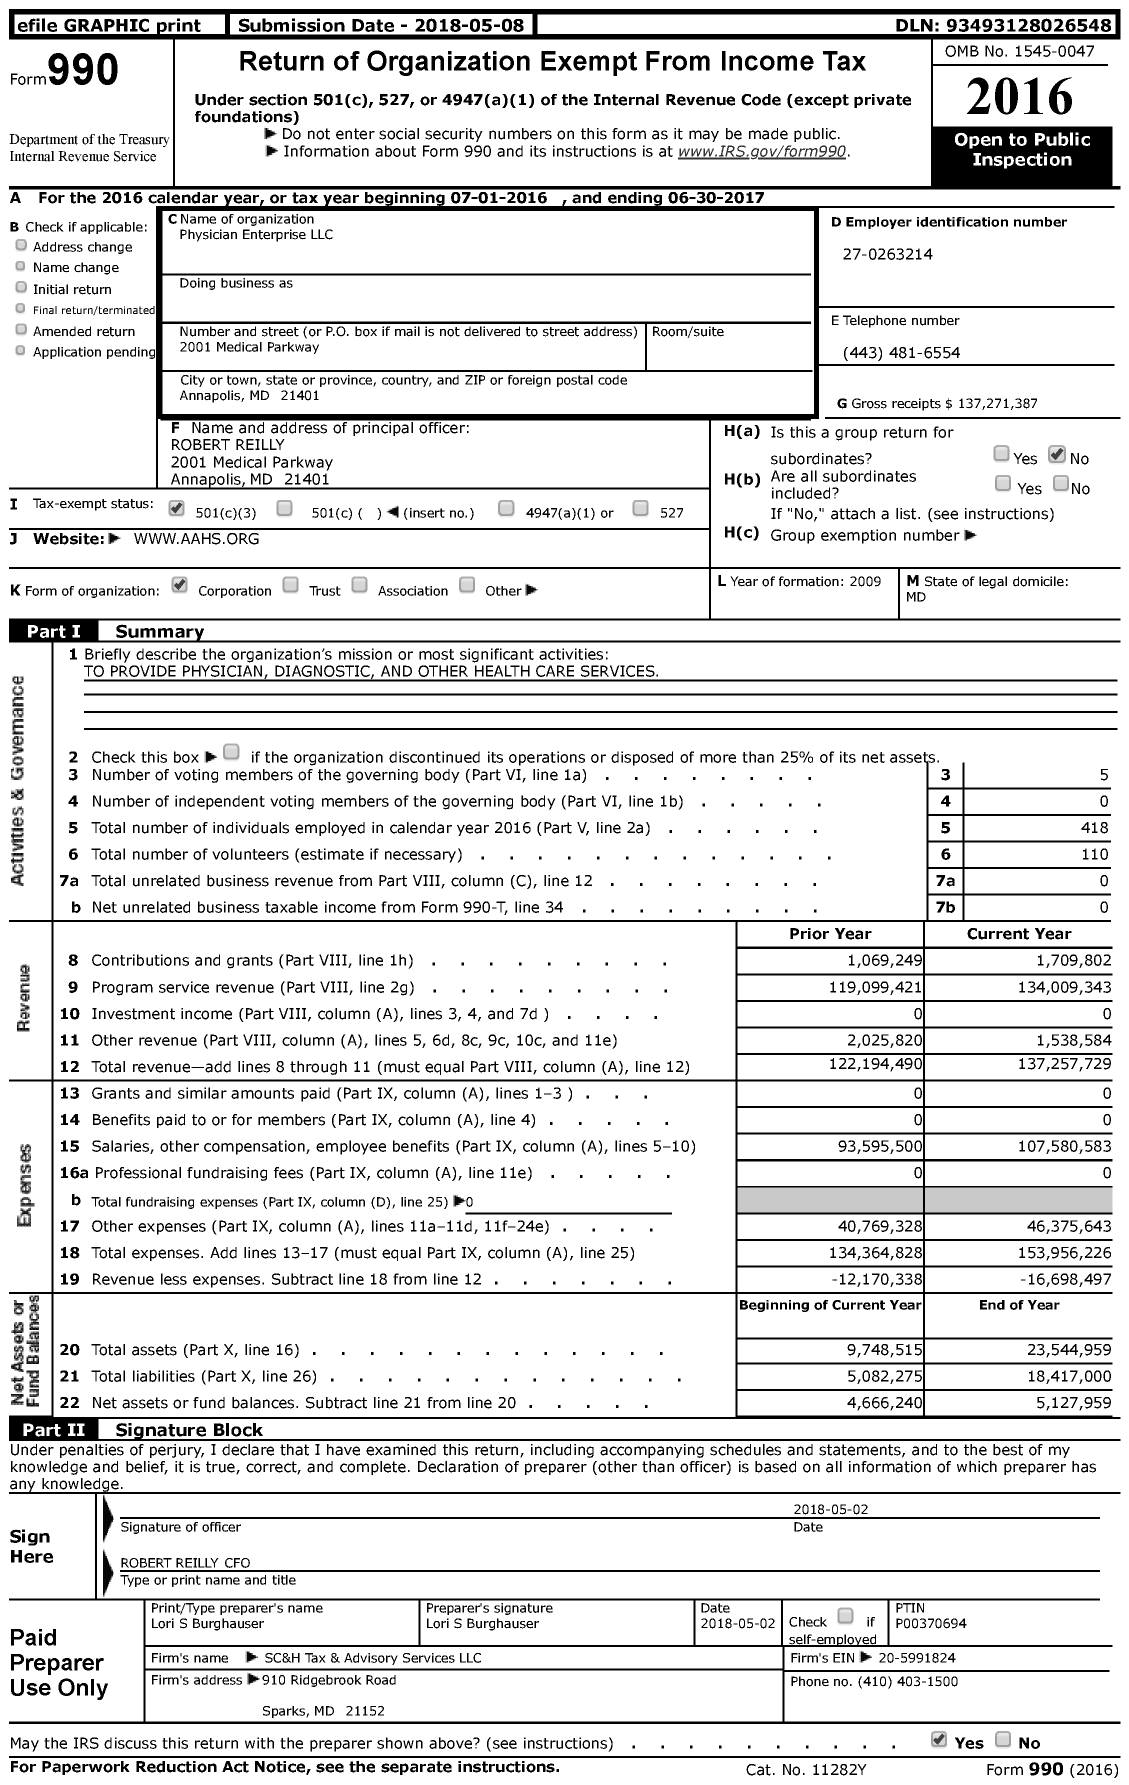 Image of first page of 2016 Form 990 for Anne Arundel Medical Center (AAMC)